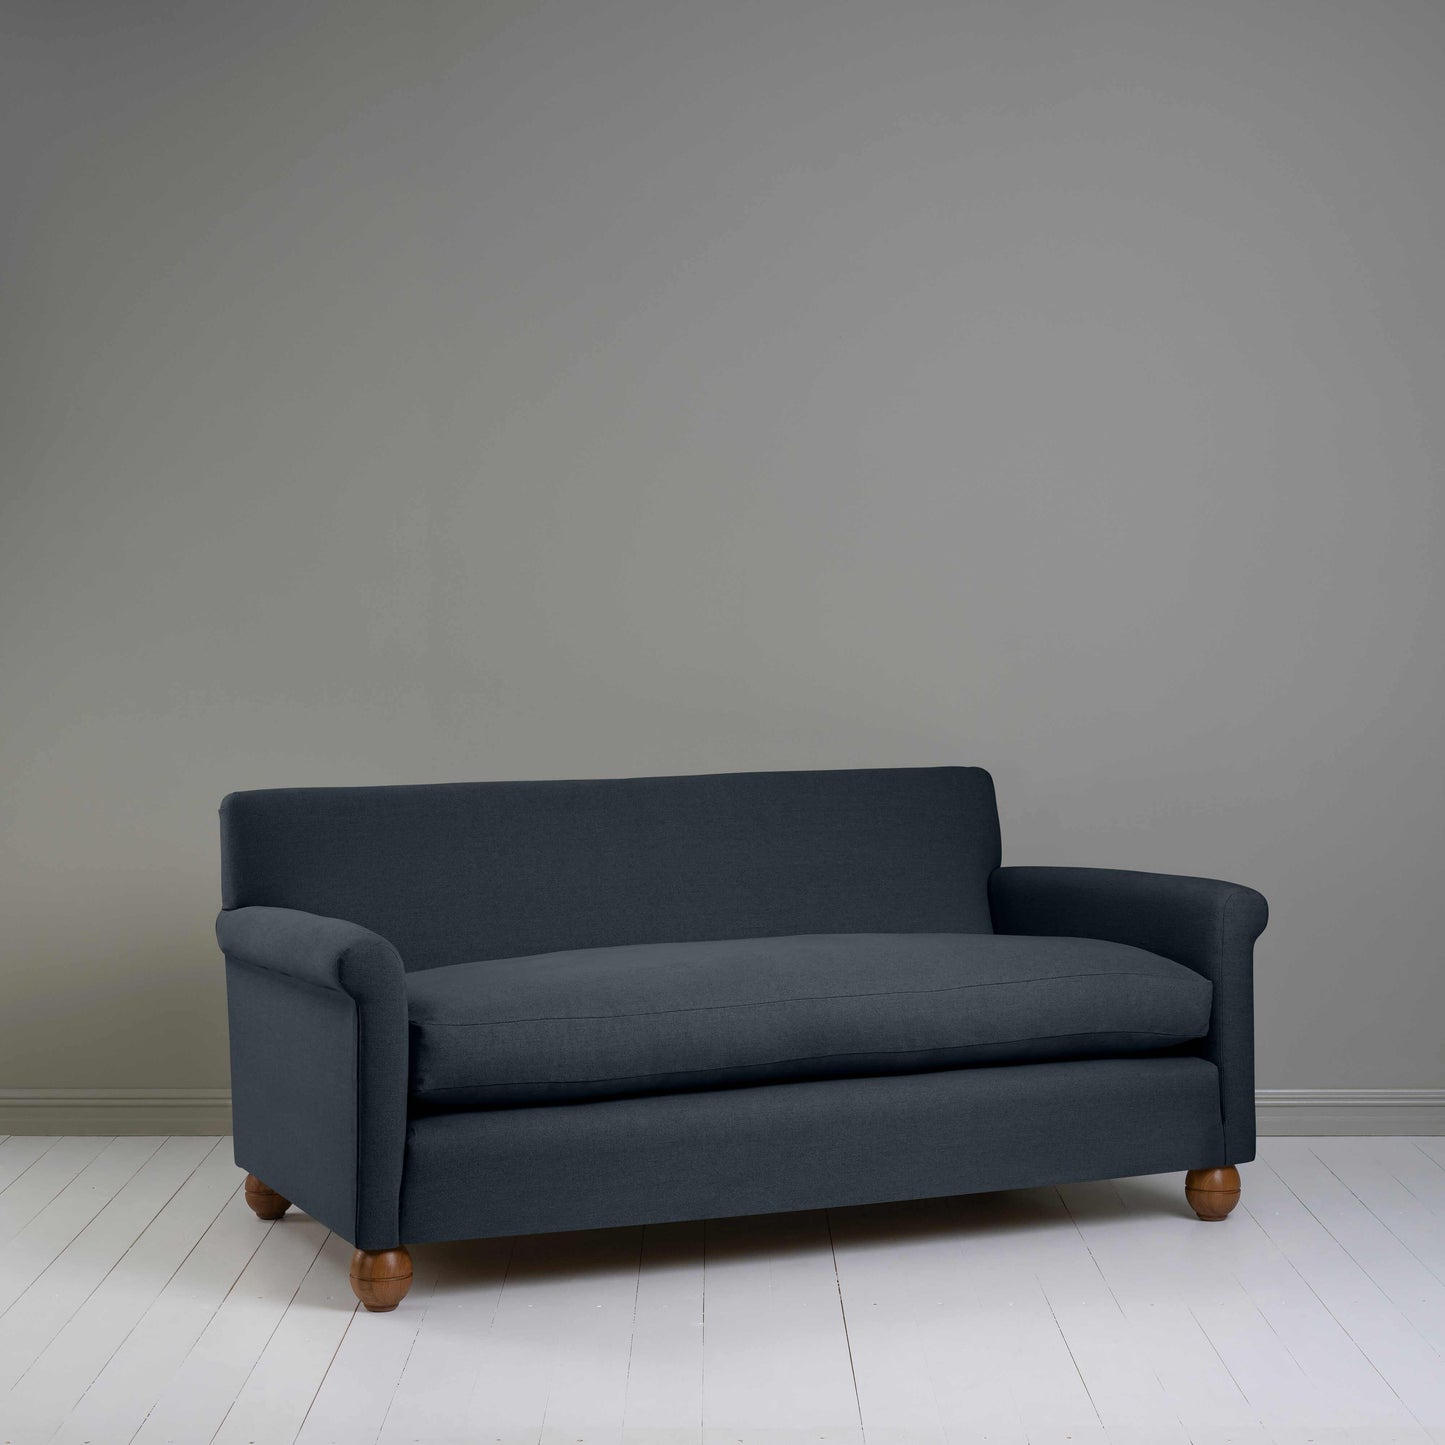 Idler 3 Seater Sofa in Laidback Linen Midnight